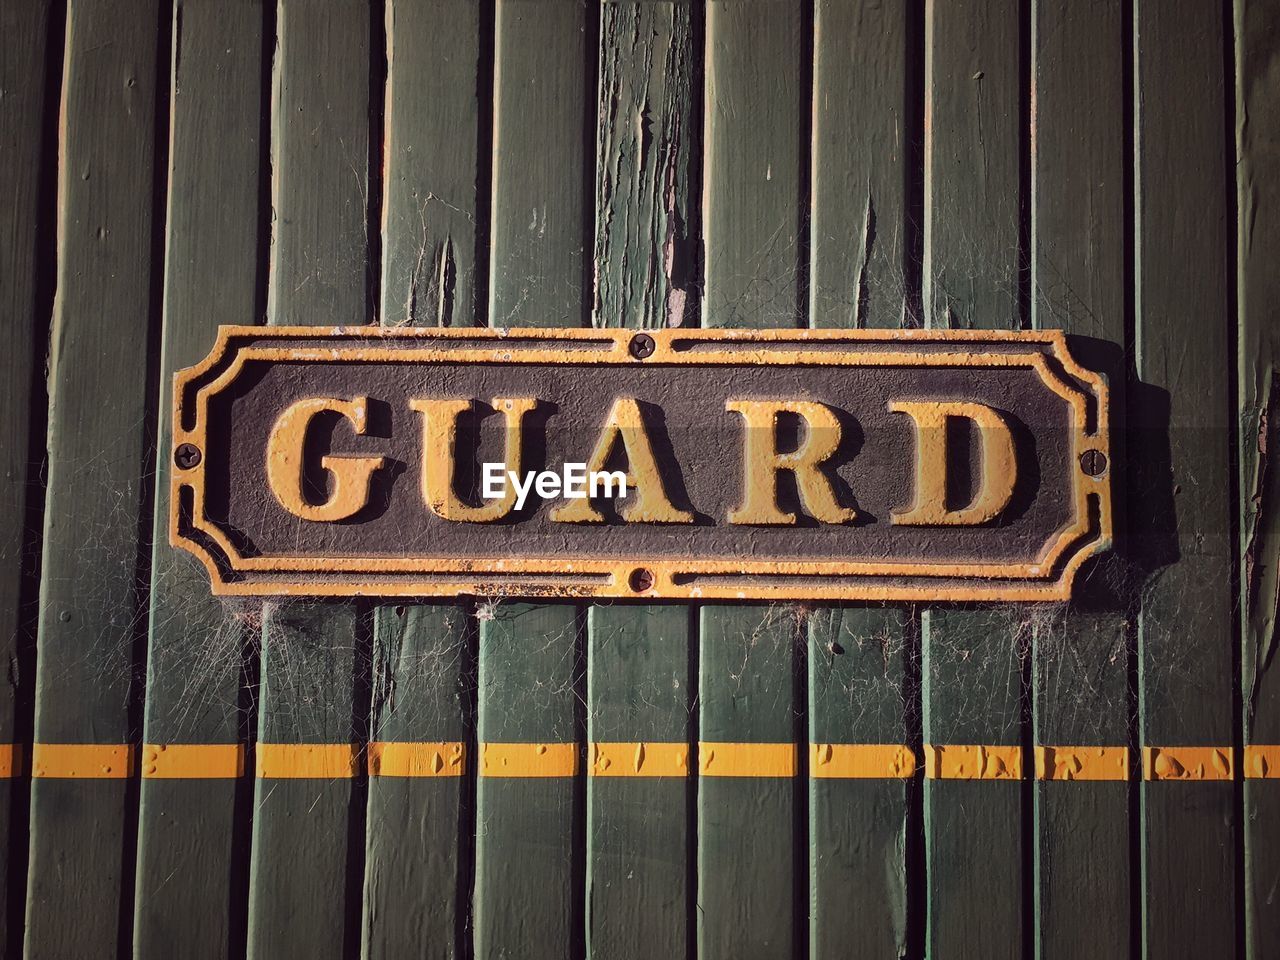 Close-up of metal with text mounted on wood of old train